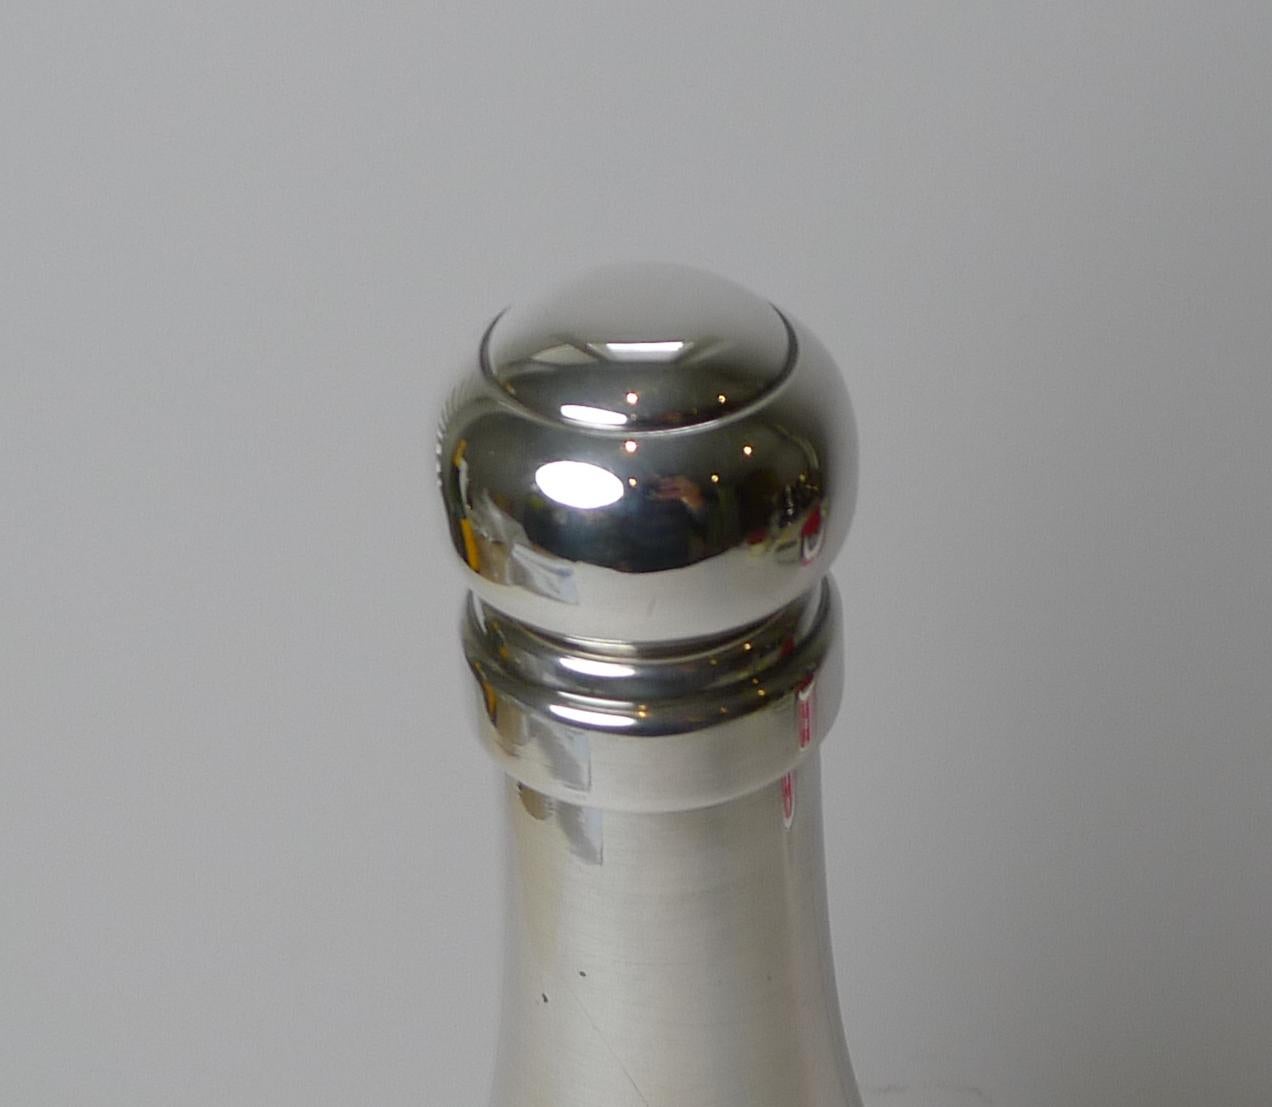 A rare French Recipe cocktail shaker made in silver plate in the form of a champagne bottle. What makes this one so special and collectable is the engraved mount to the front engraved with seven cocktail recipes with instructions how to serve each.